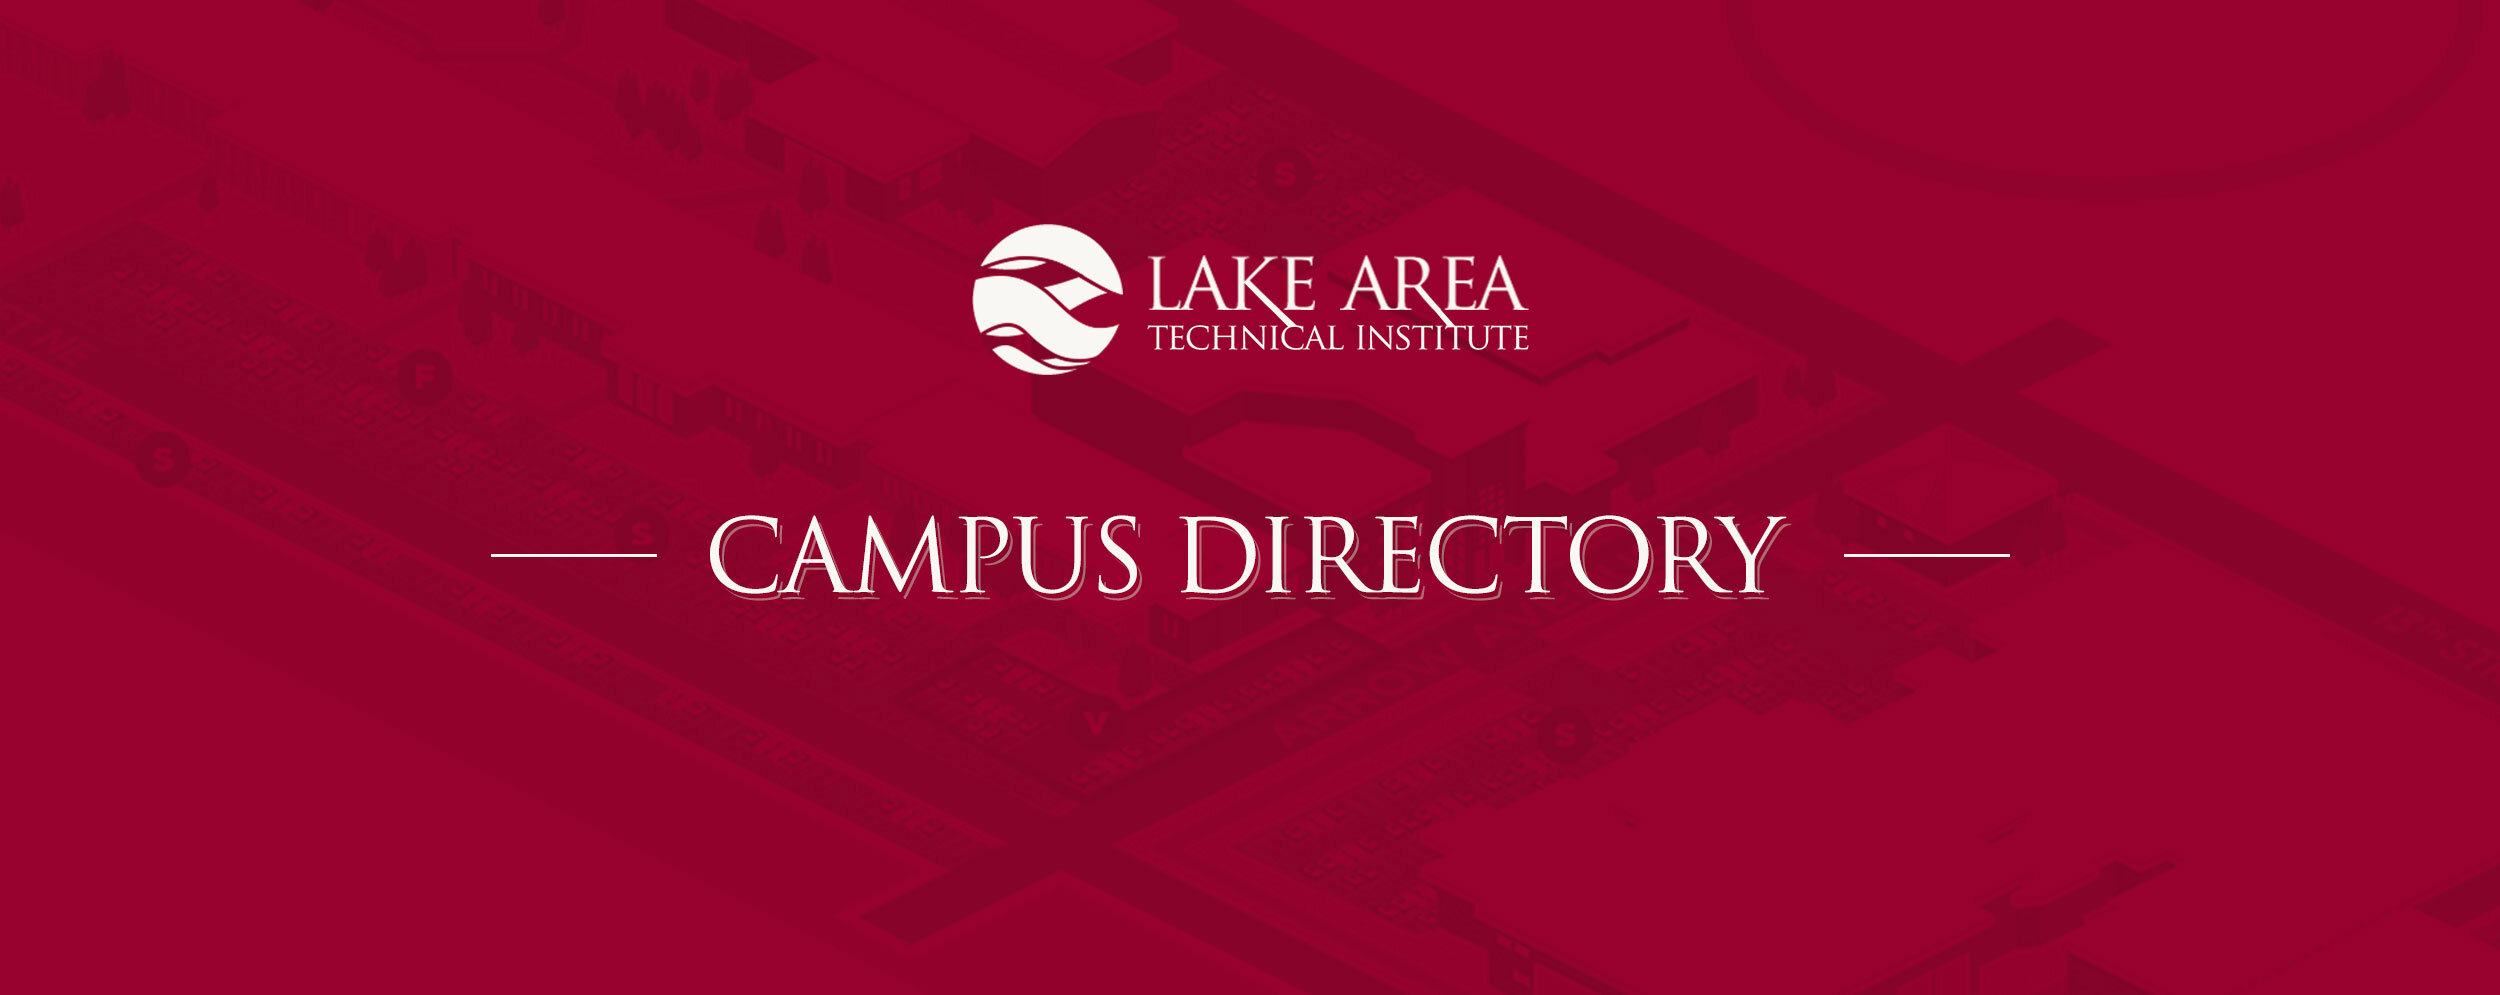 Lake Area Technical College Homepage